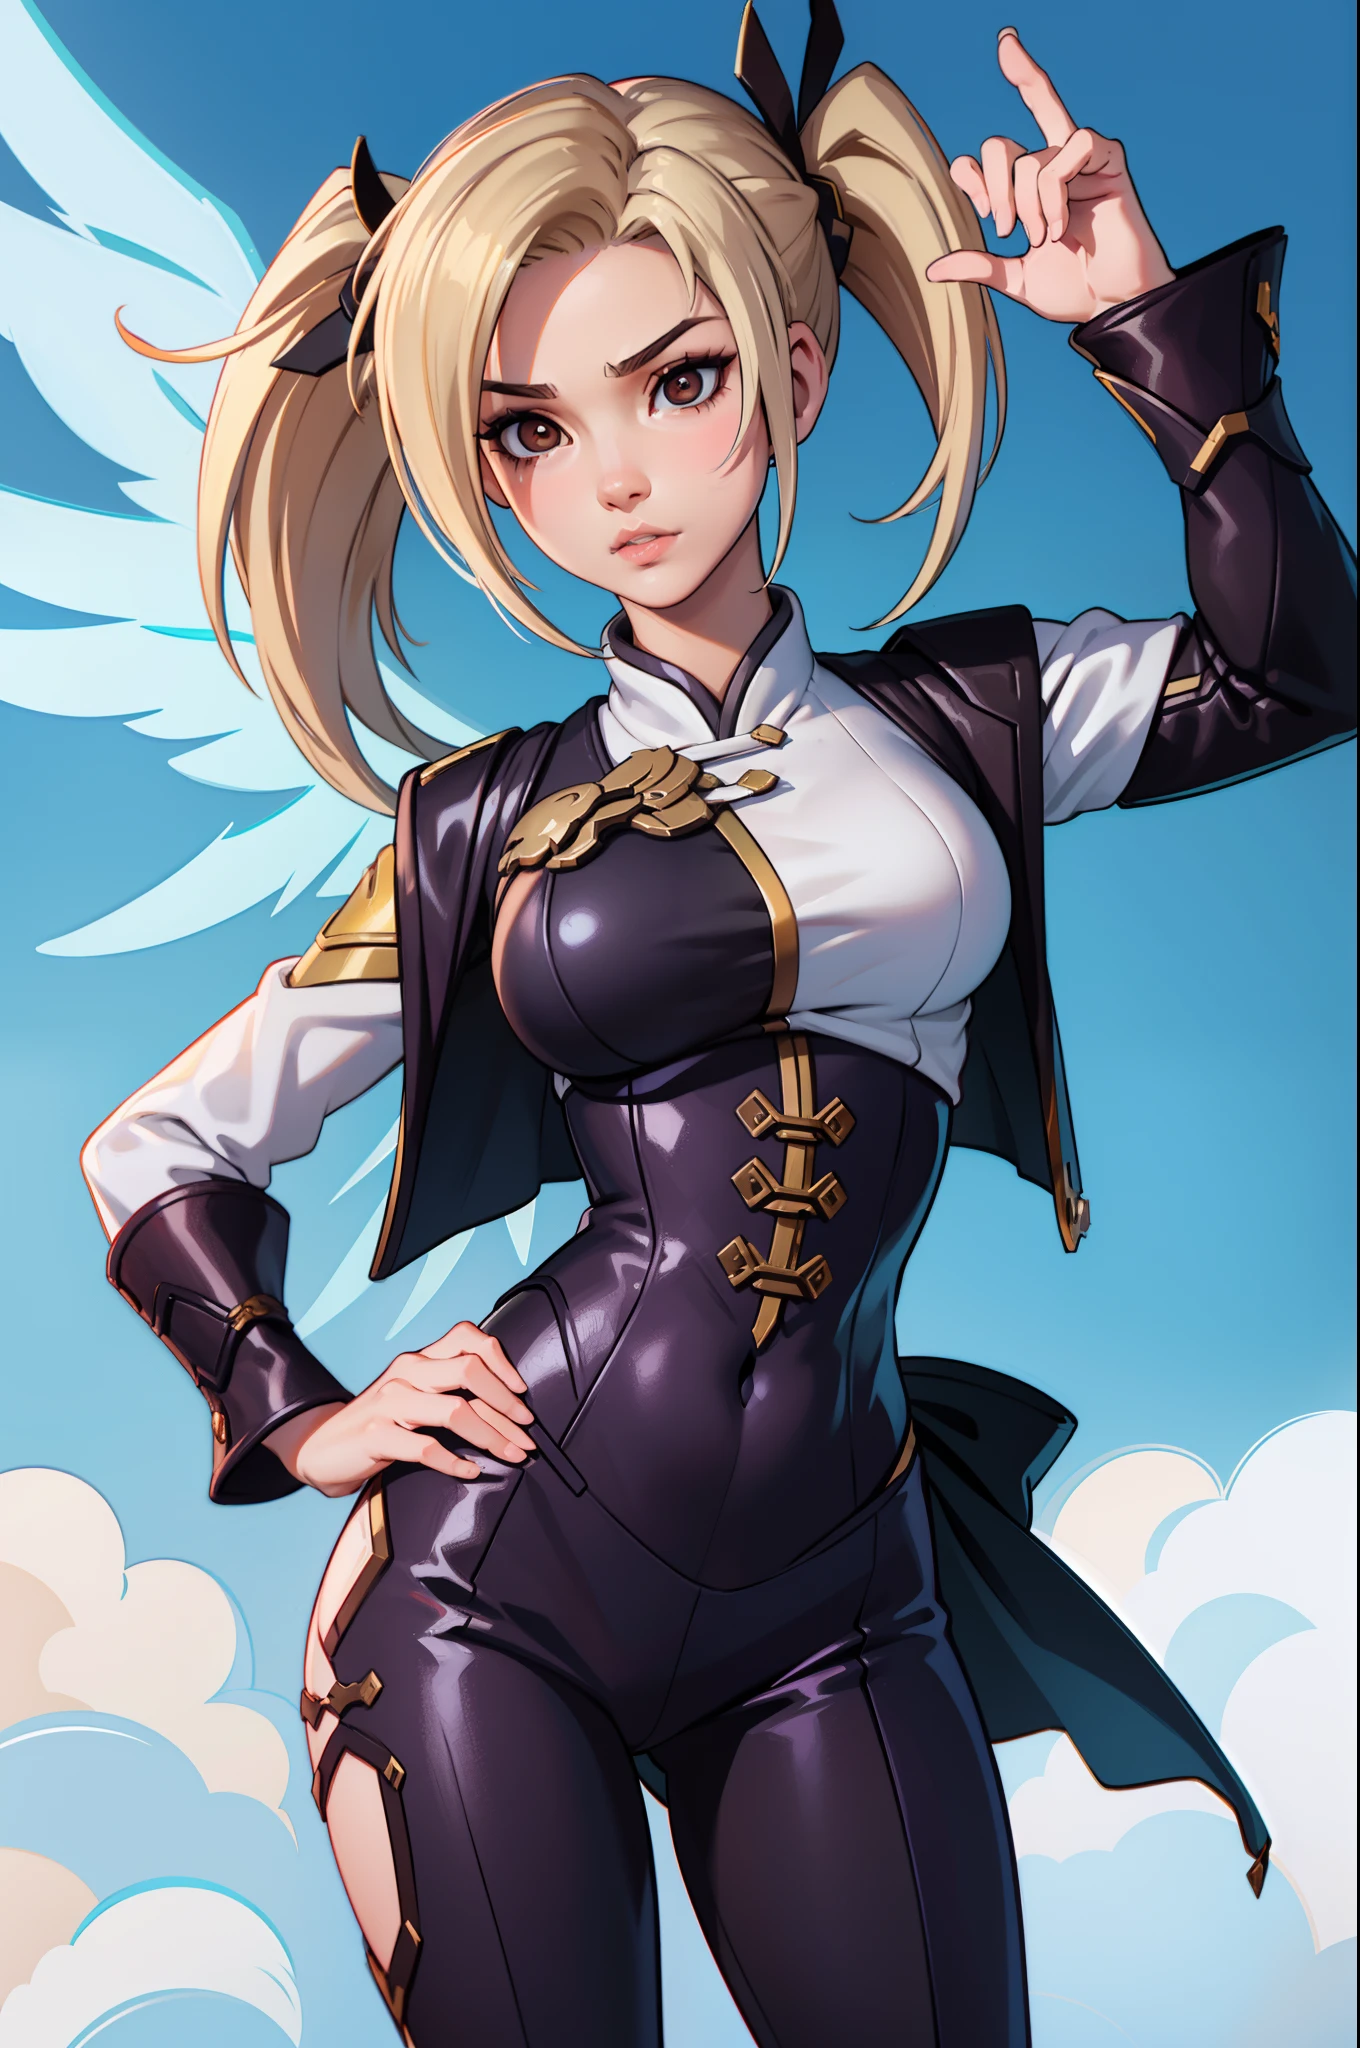 blonde in black Chinese oriental style outfit, xianxia de fully body, angelic white wings, neckleace, nervous expression, big boobies, big-ass, style cartoon,njo majestoso de fully body, tall female angel, clear outfit design, Mercy do jogo Overwatch (2016), Xianxia de fully body, imagem de fully body, fully body